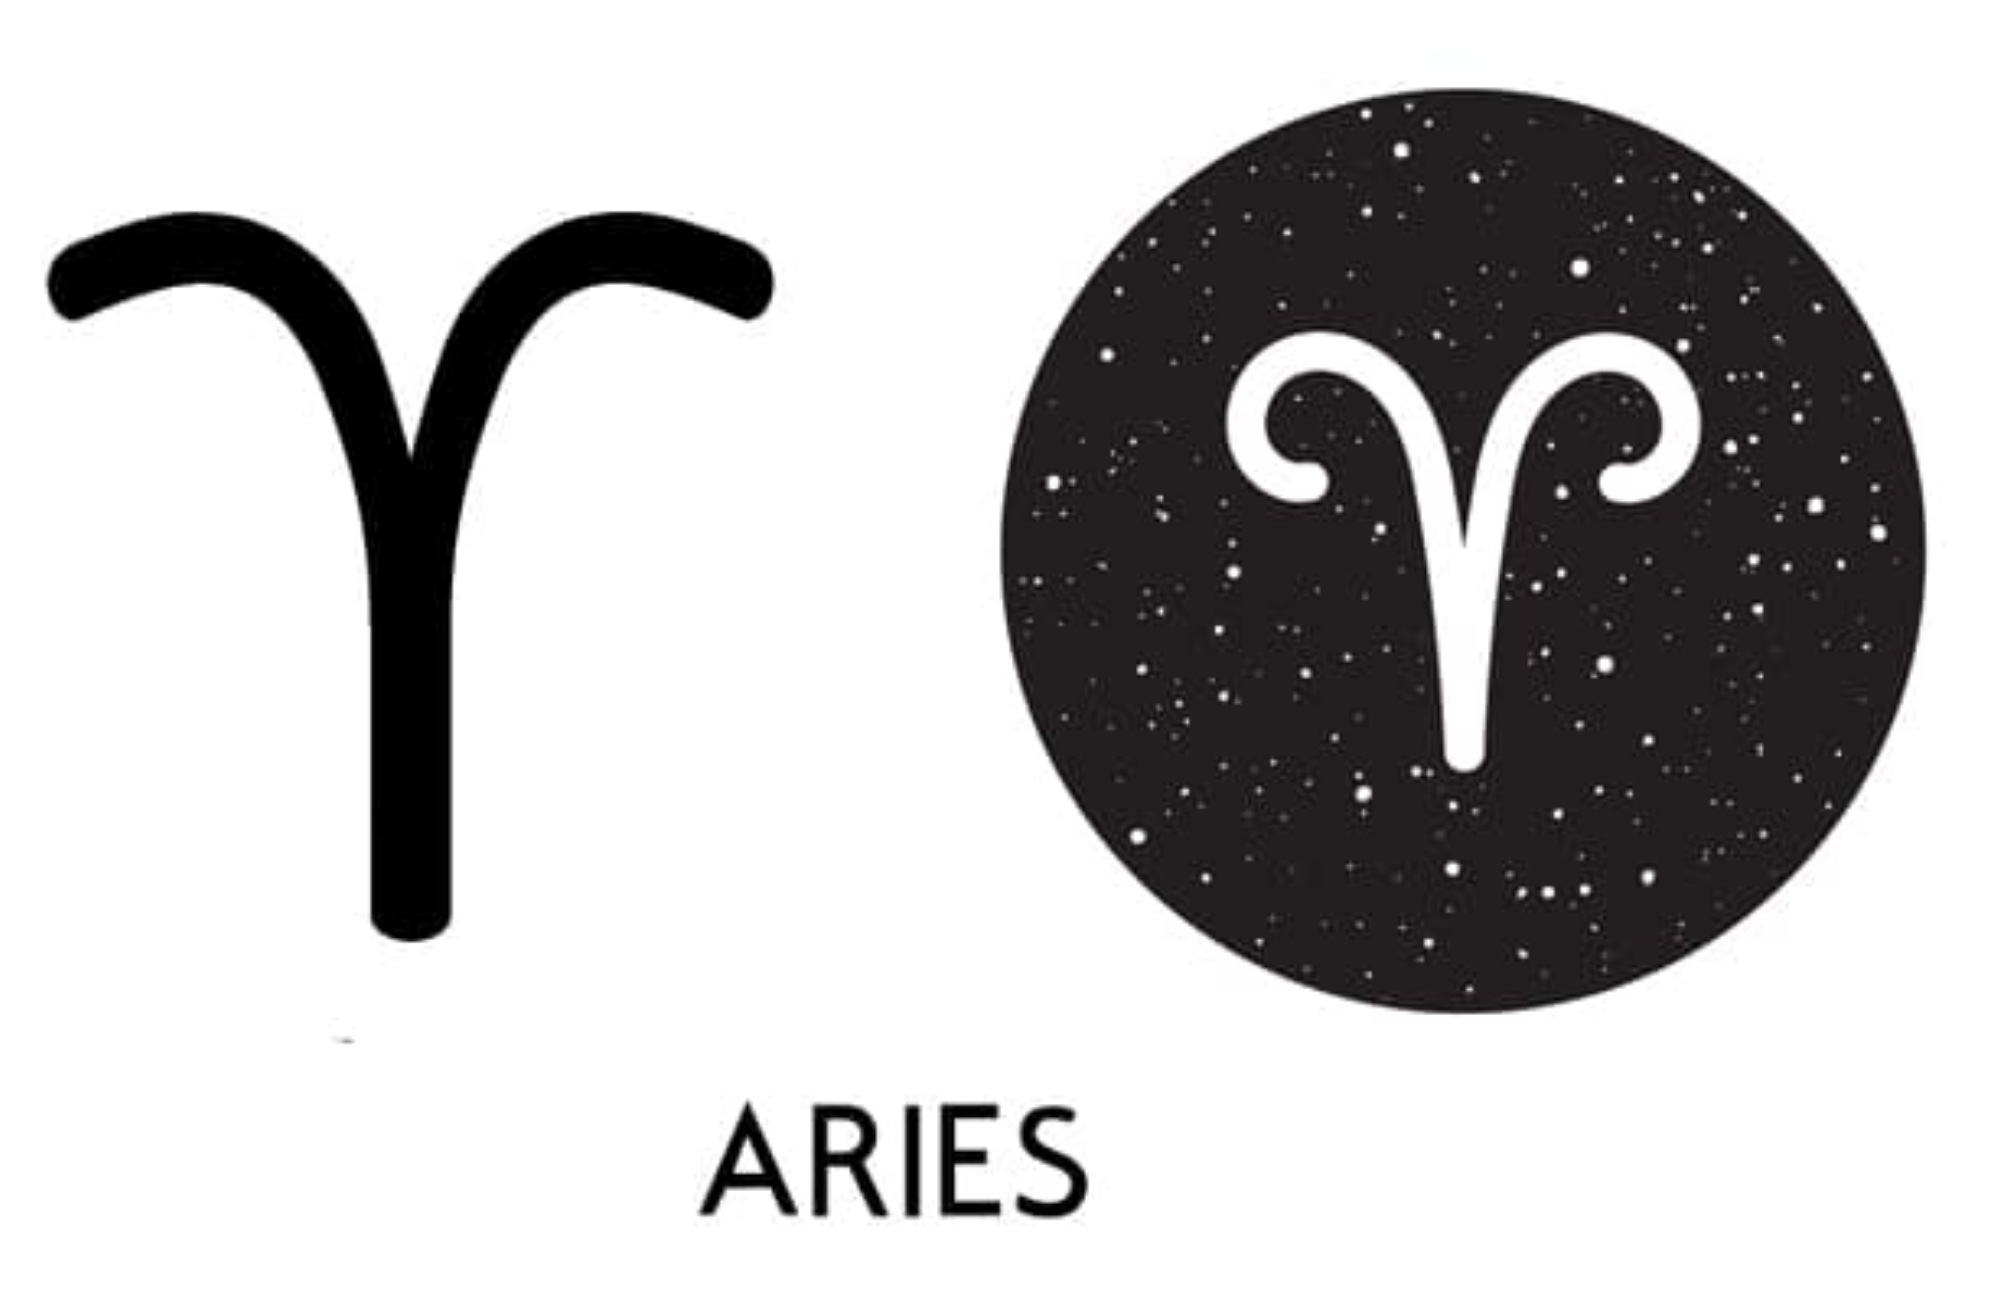 The two Aries logo, one of the Aries logos is in a black circle